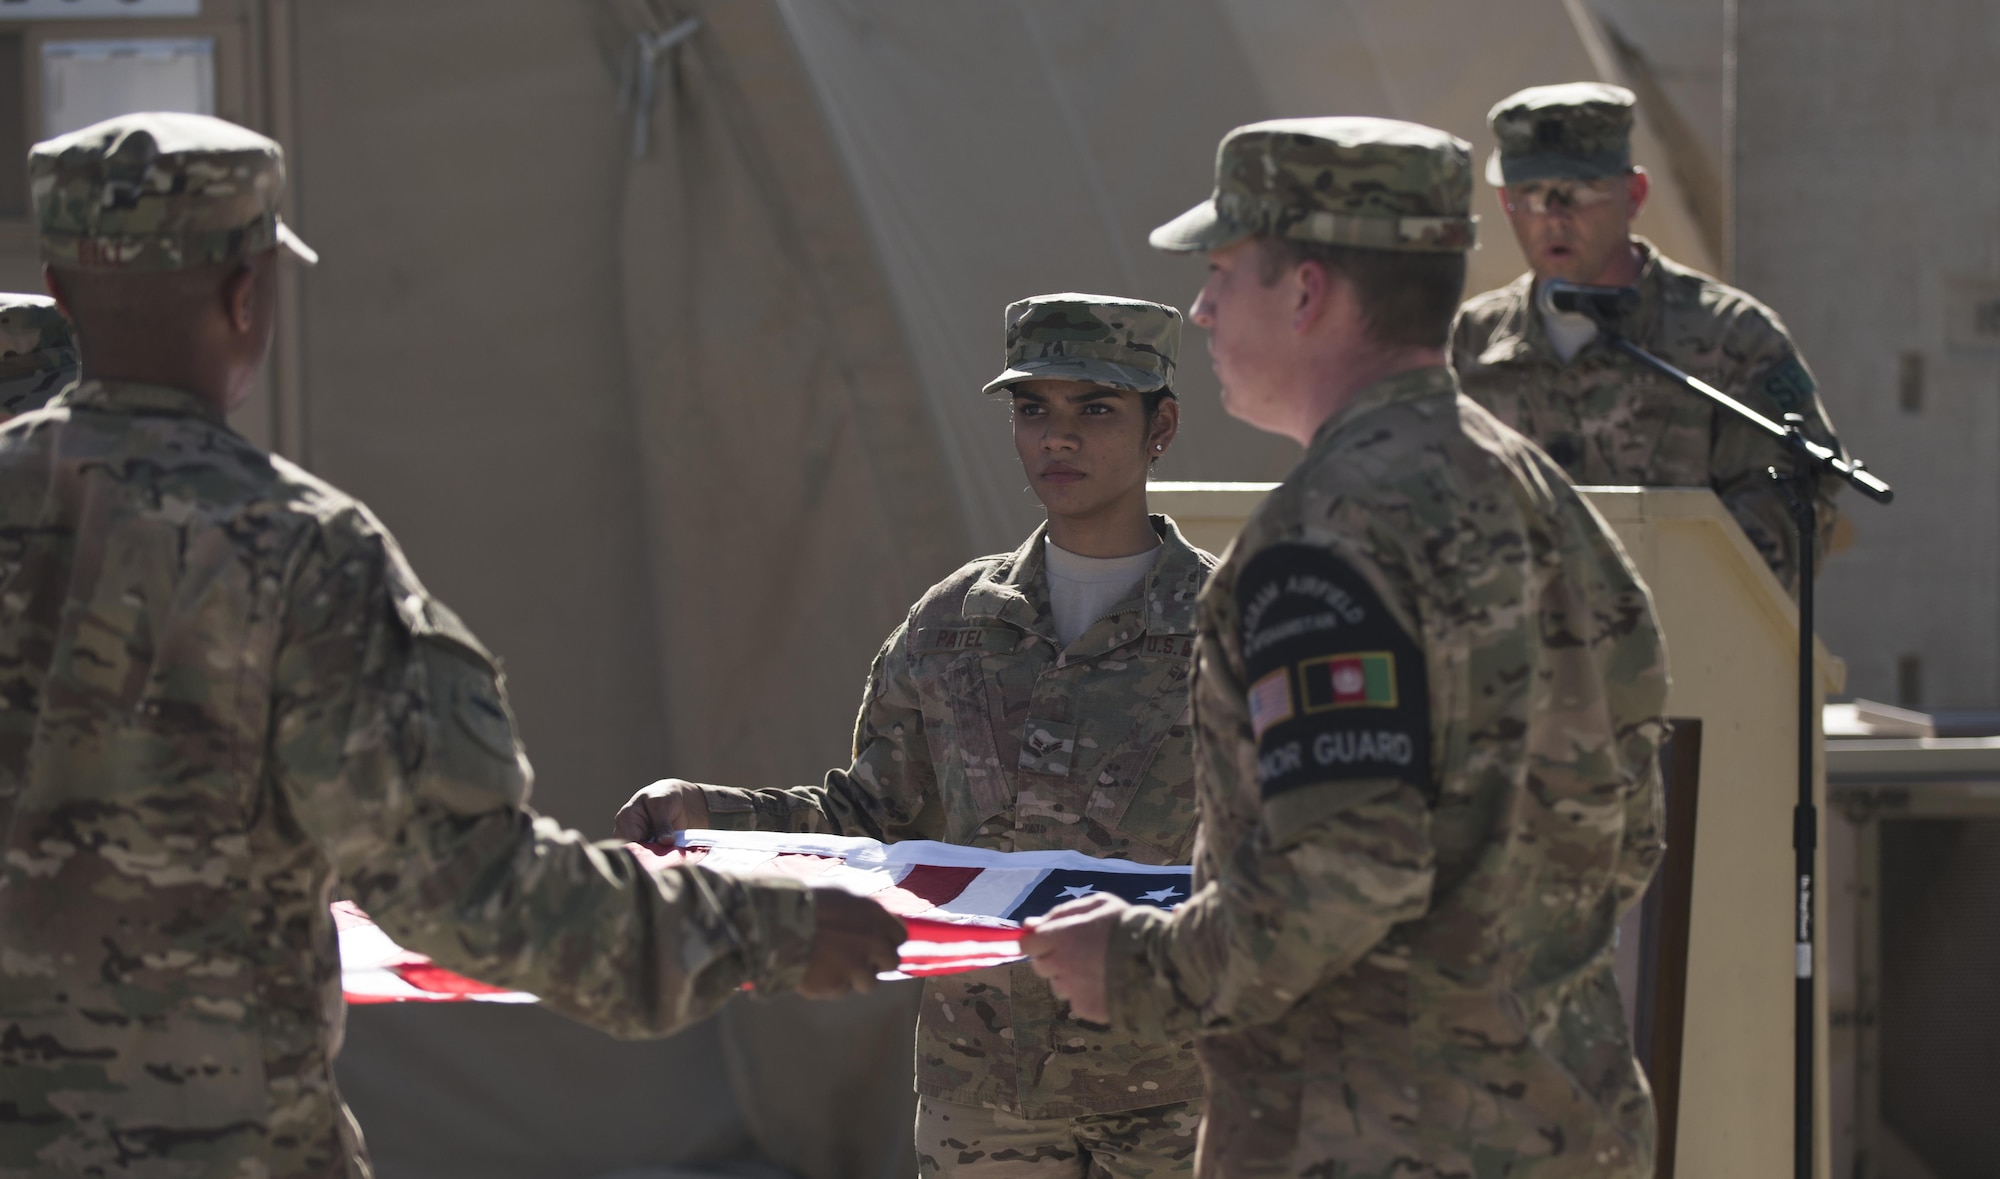 Capt. Benjamin Swope, 455th Expeditionary Security Forces Squadron, reads the names of fallen servicemembers as the base Honor Guard team folds the flag at Bagram Airfield, Afghanistan, May 30, 2016. The Company Grade Officer Council hosted the remembrance ceremony to honor those who gave all in service to our country. (U.S. Air Force photo by Tech. Sgt. Tyrona Lawson)